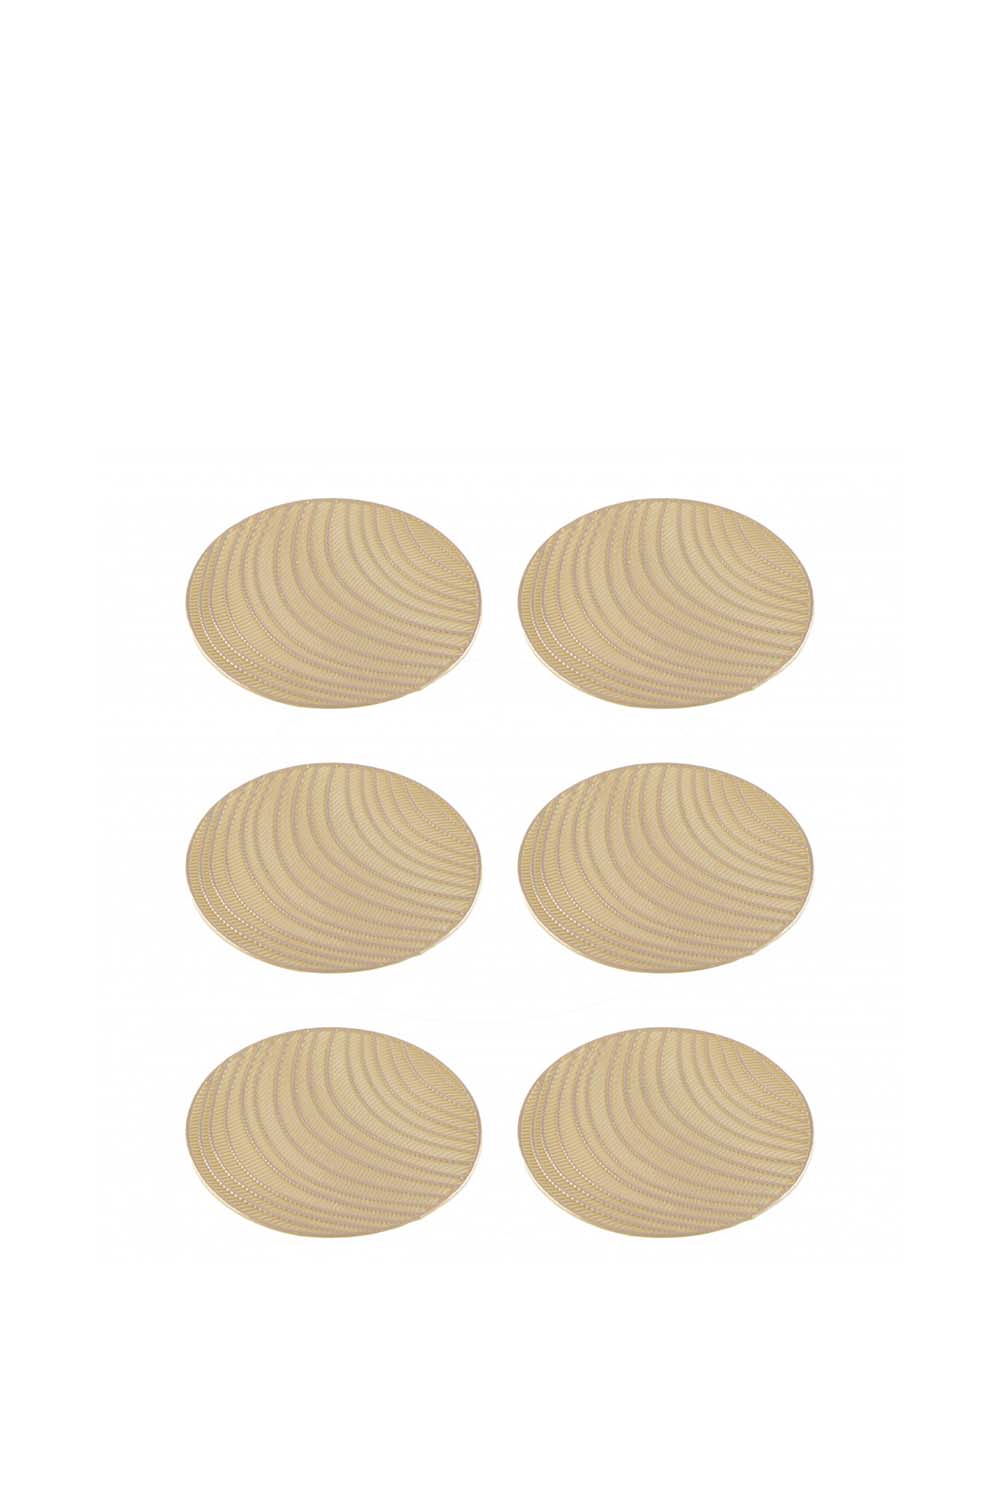 Gold Striped Coasters, Set of 6